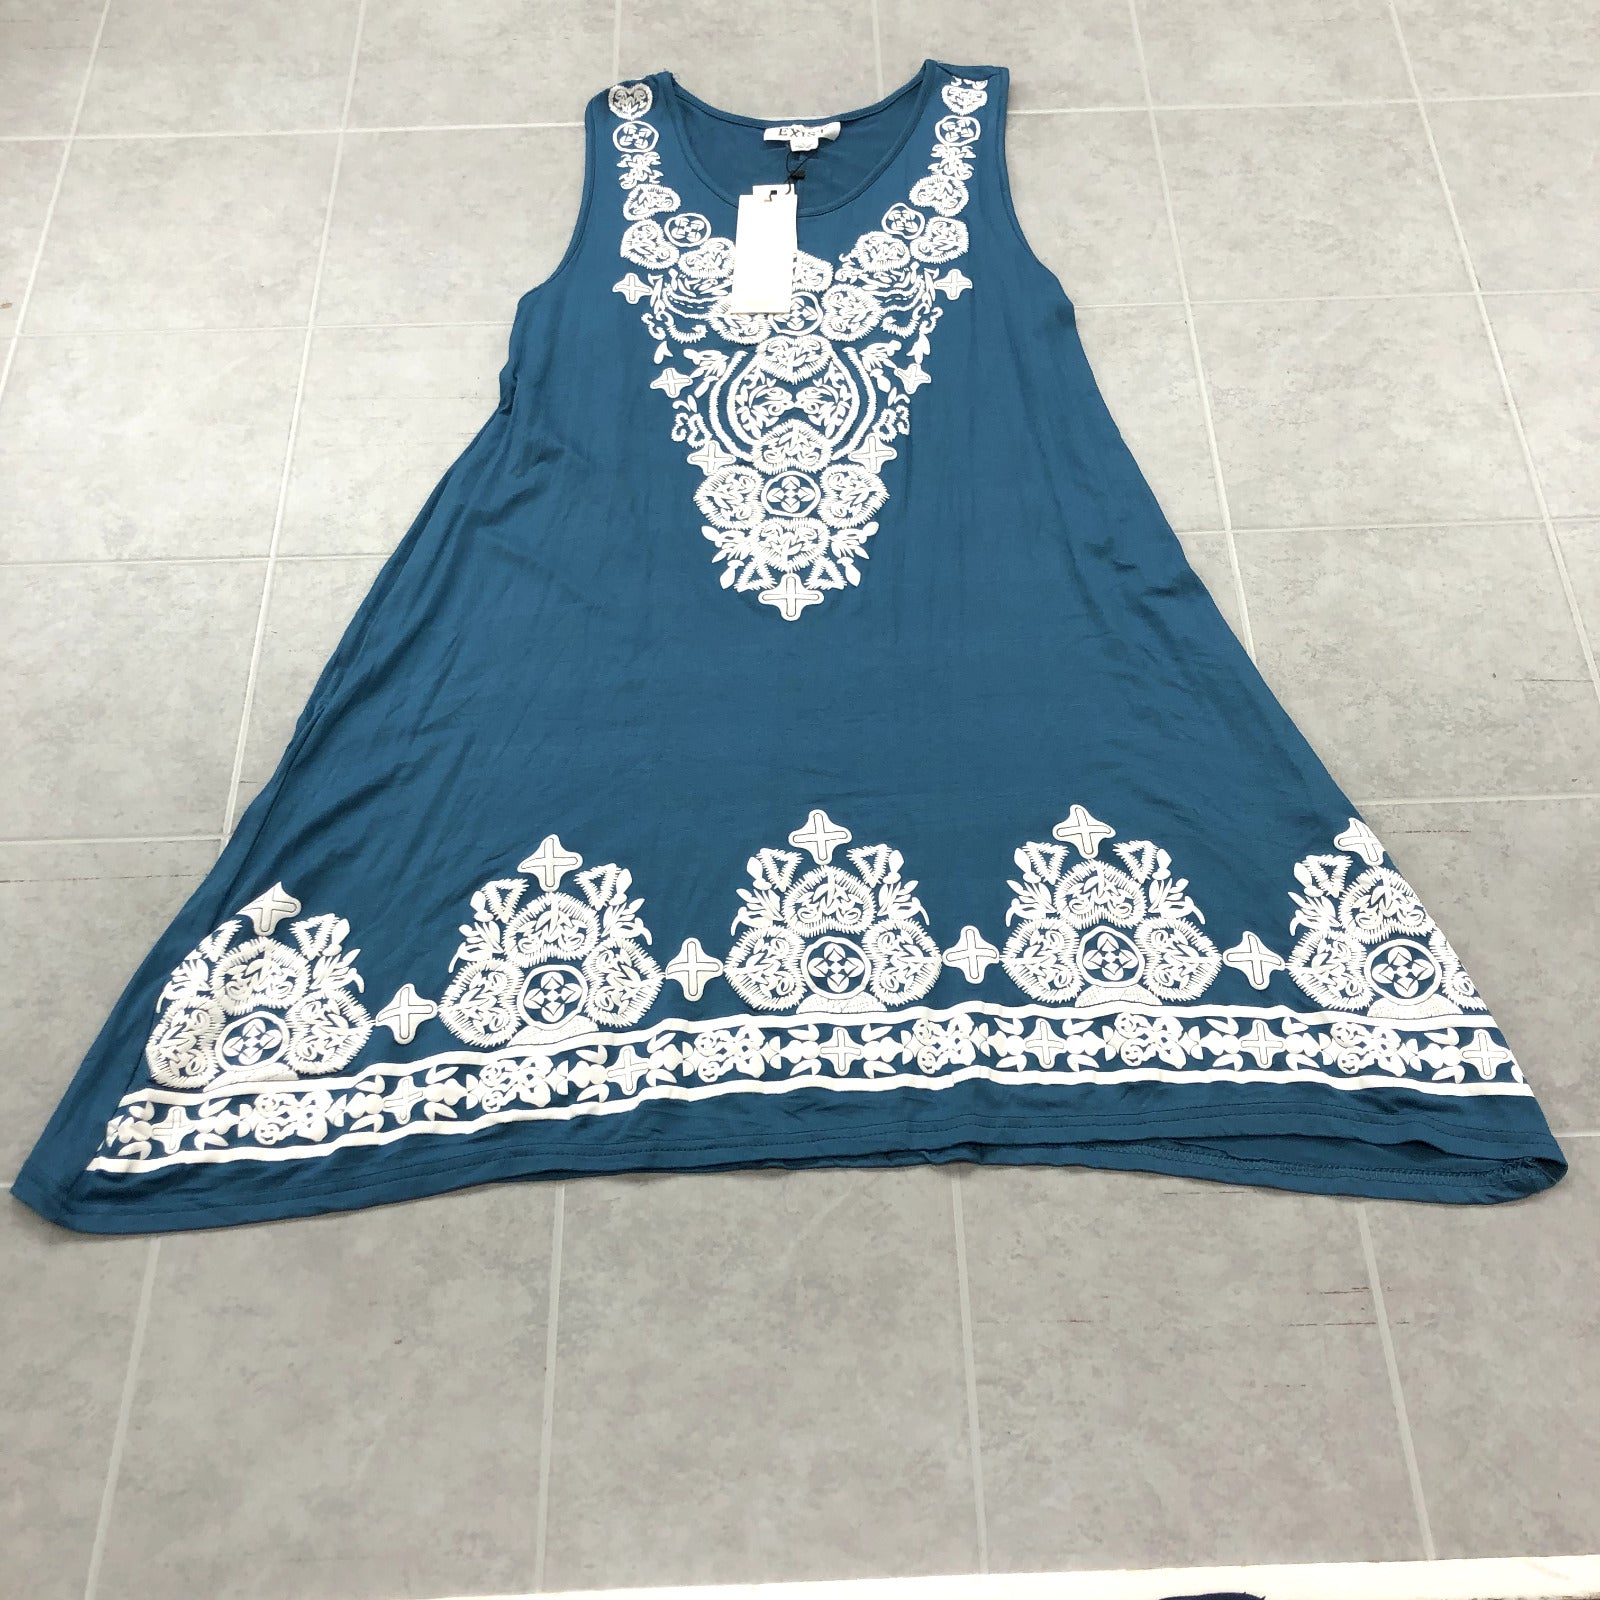 EXIST Blue Sleeveless Round Neck A-Line Patterned Dress Womens Size L